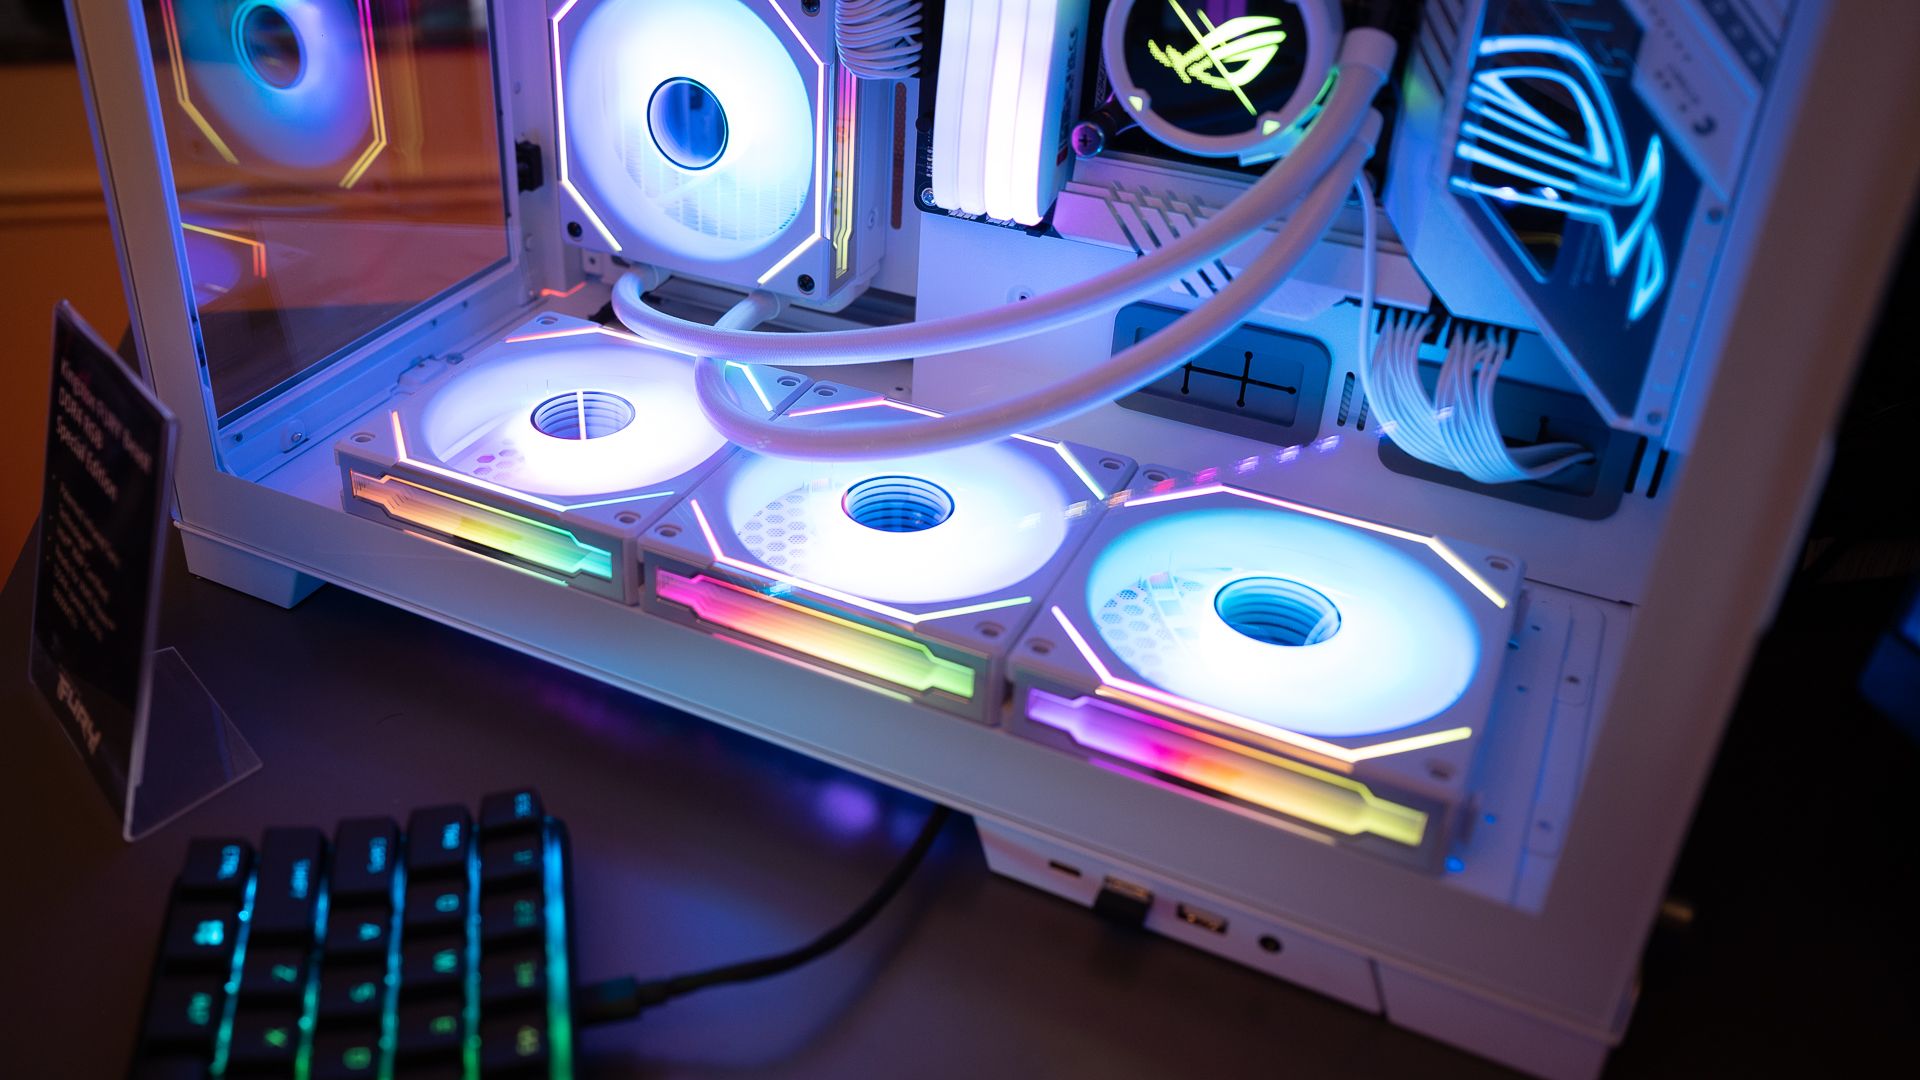 RGB fans in a gaming PC